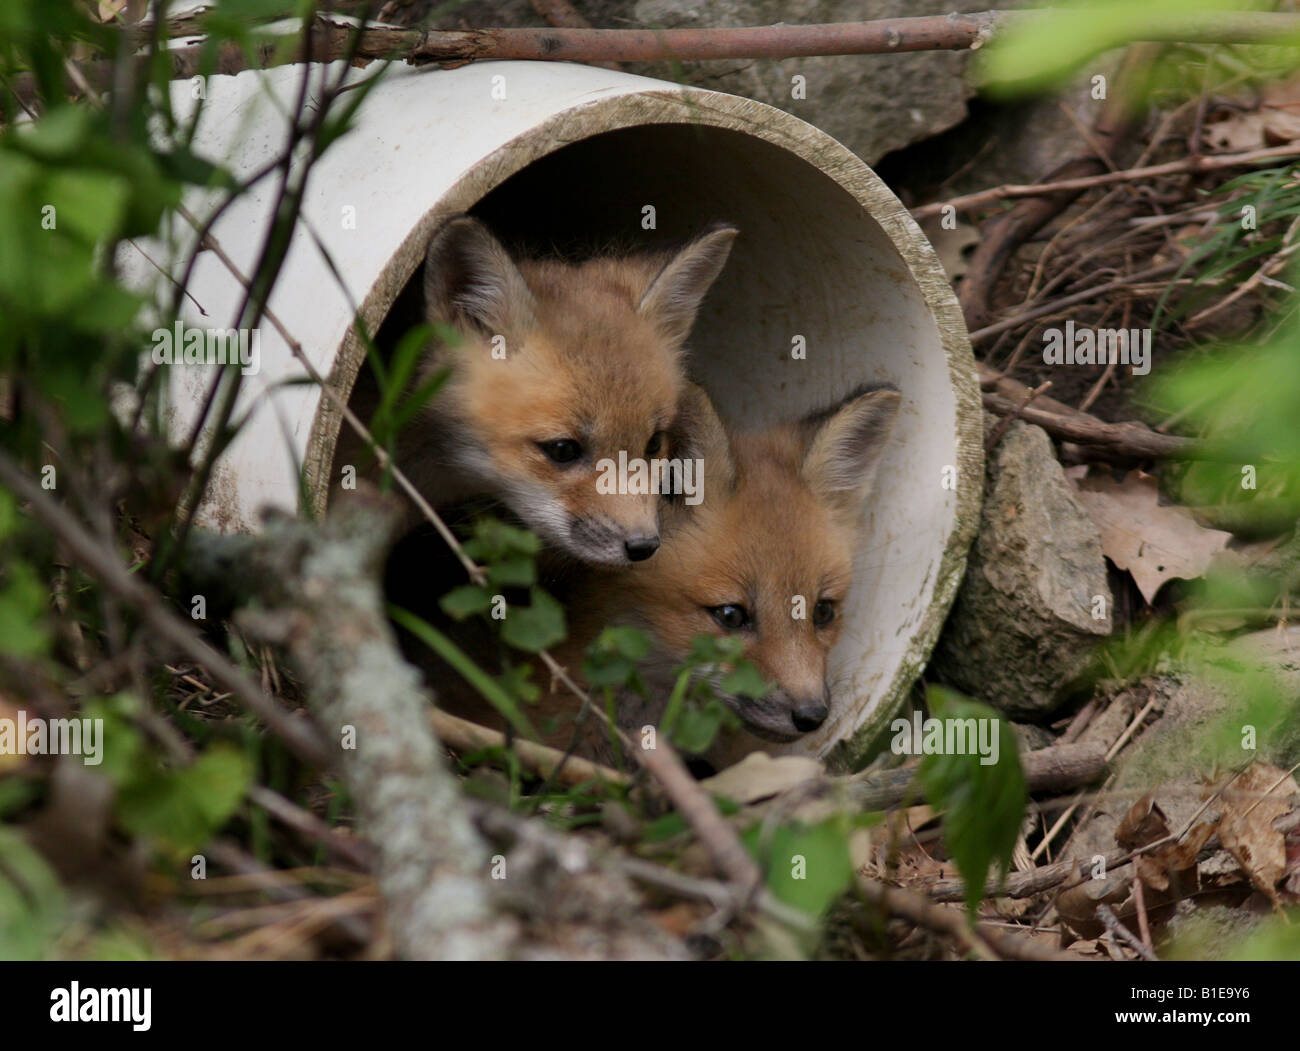 red fox pup baby young pups den pipe sewer drain urban play puppy ohio united states usa america playing puppies Stock Photo